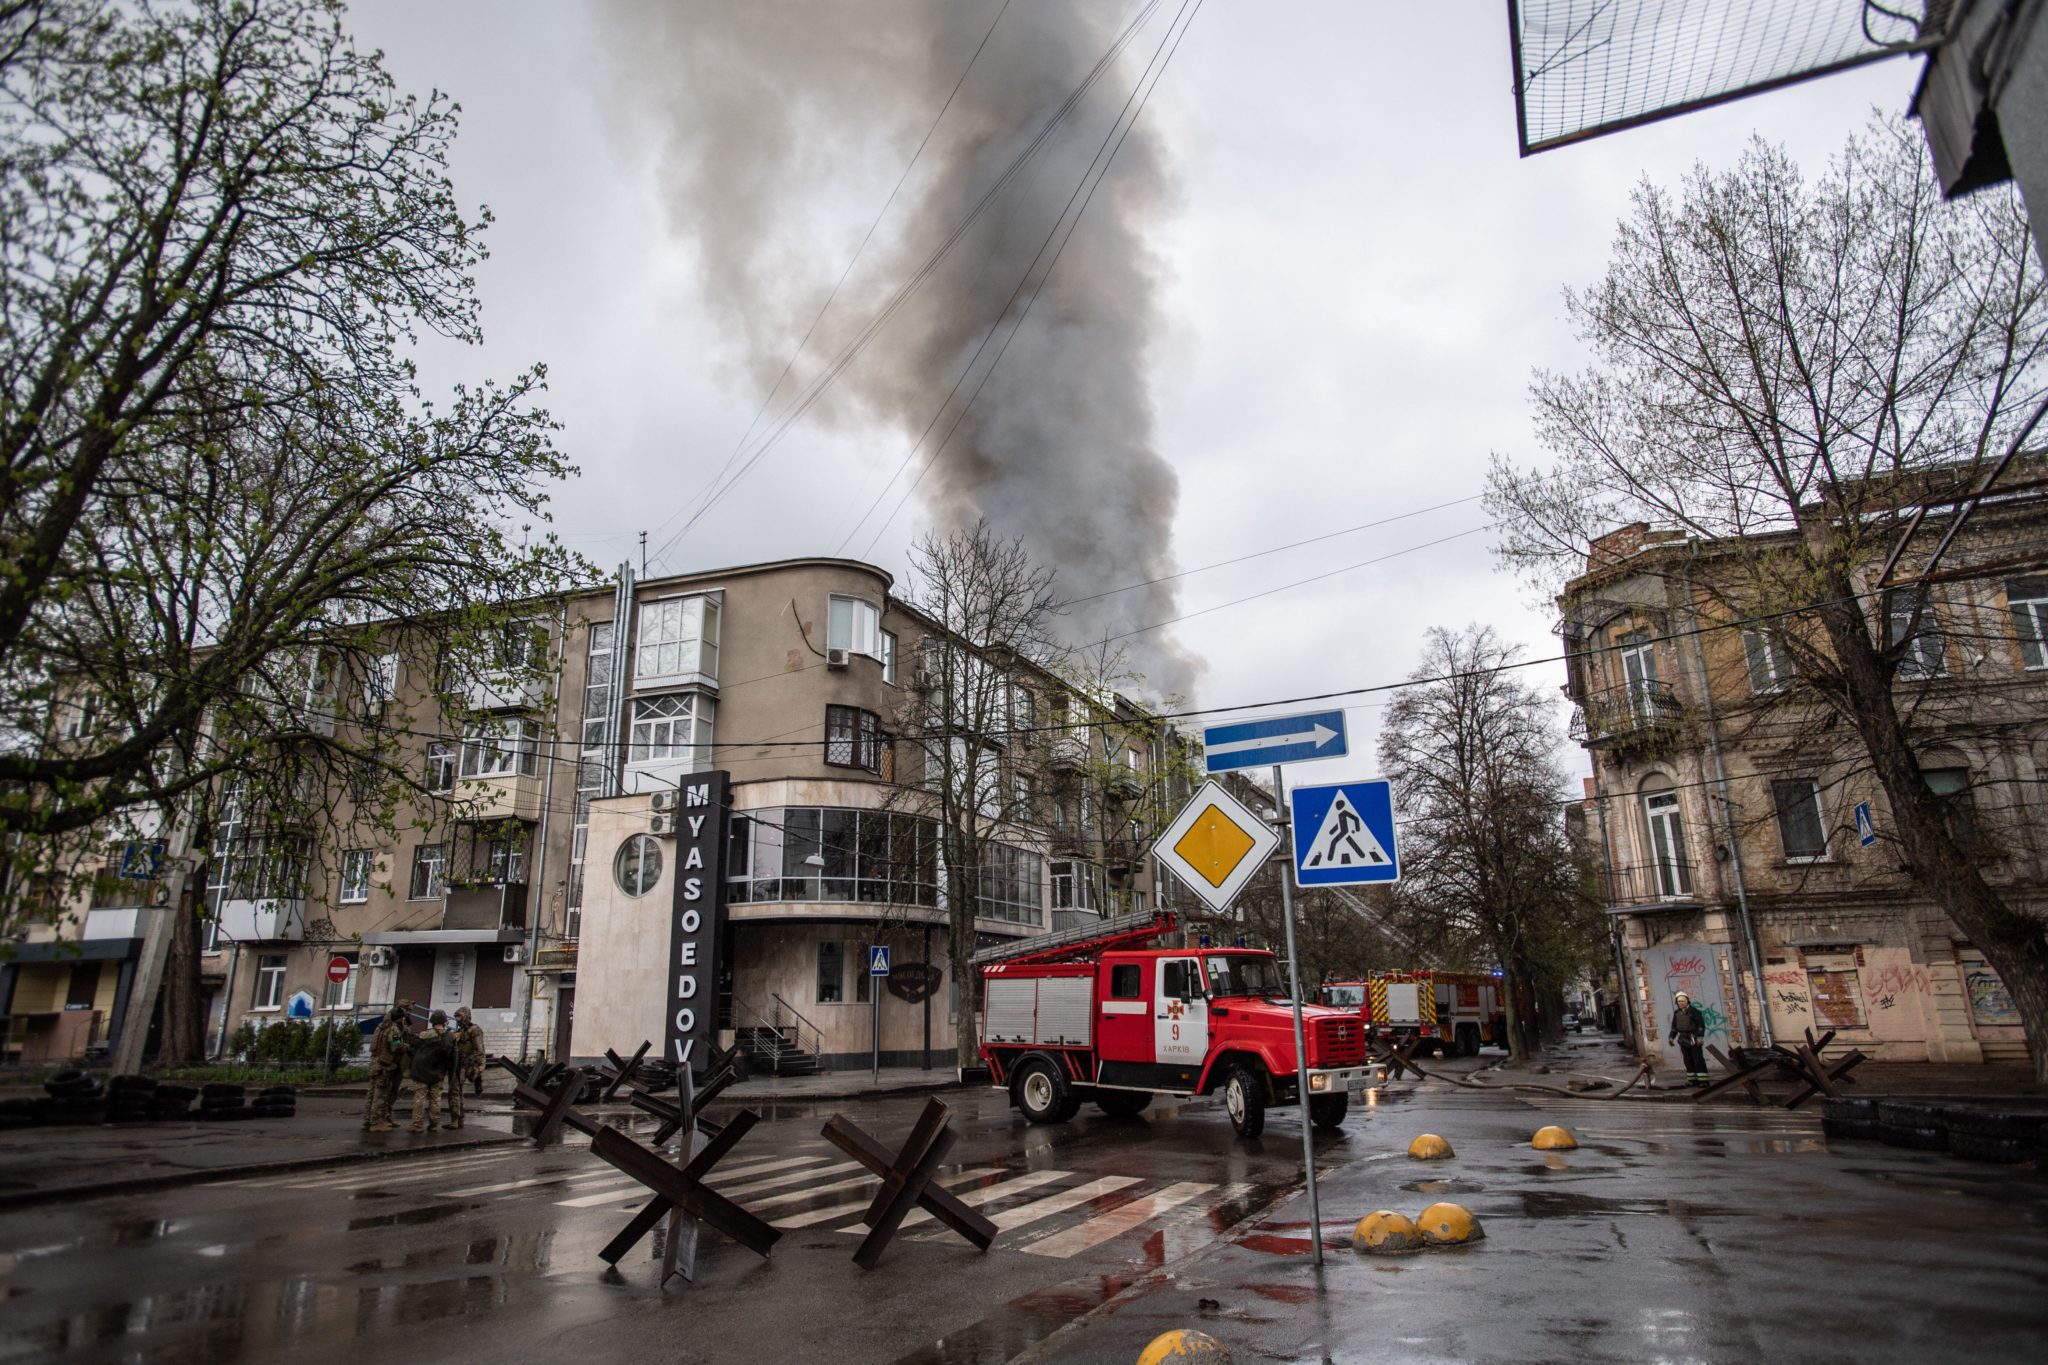 First responders arrive at the scene after a Russian rocket strike on central Kharkiv, 17-04-2022.  Image: ZUMA Press Inc / Alamy Stock Photo